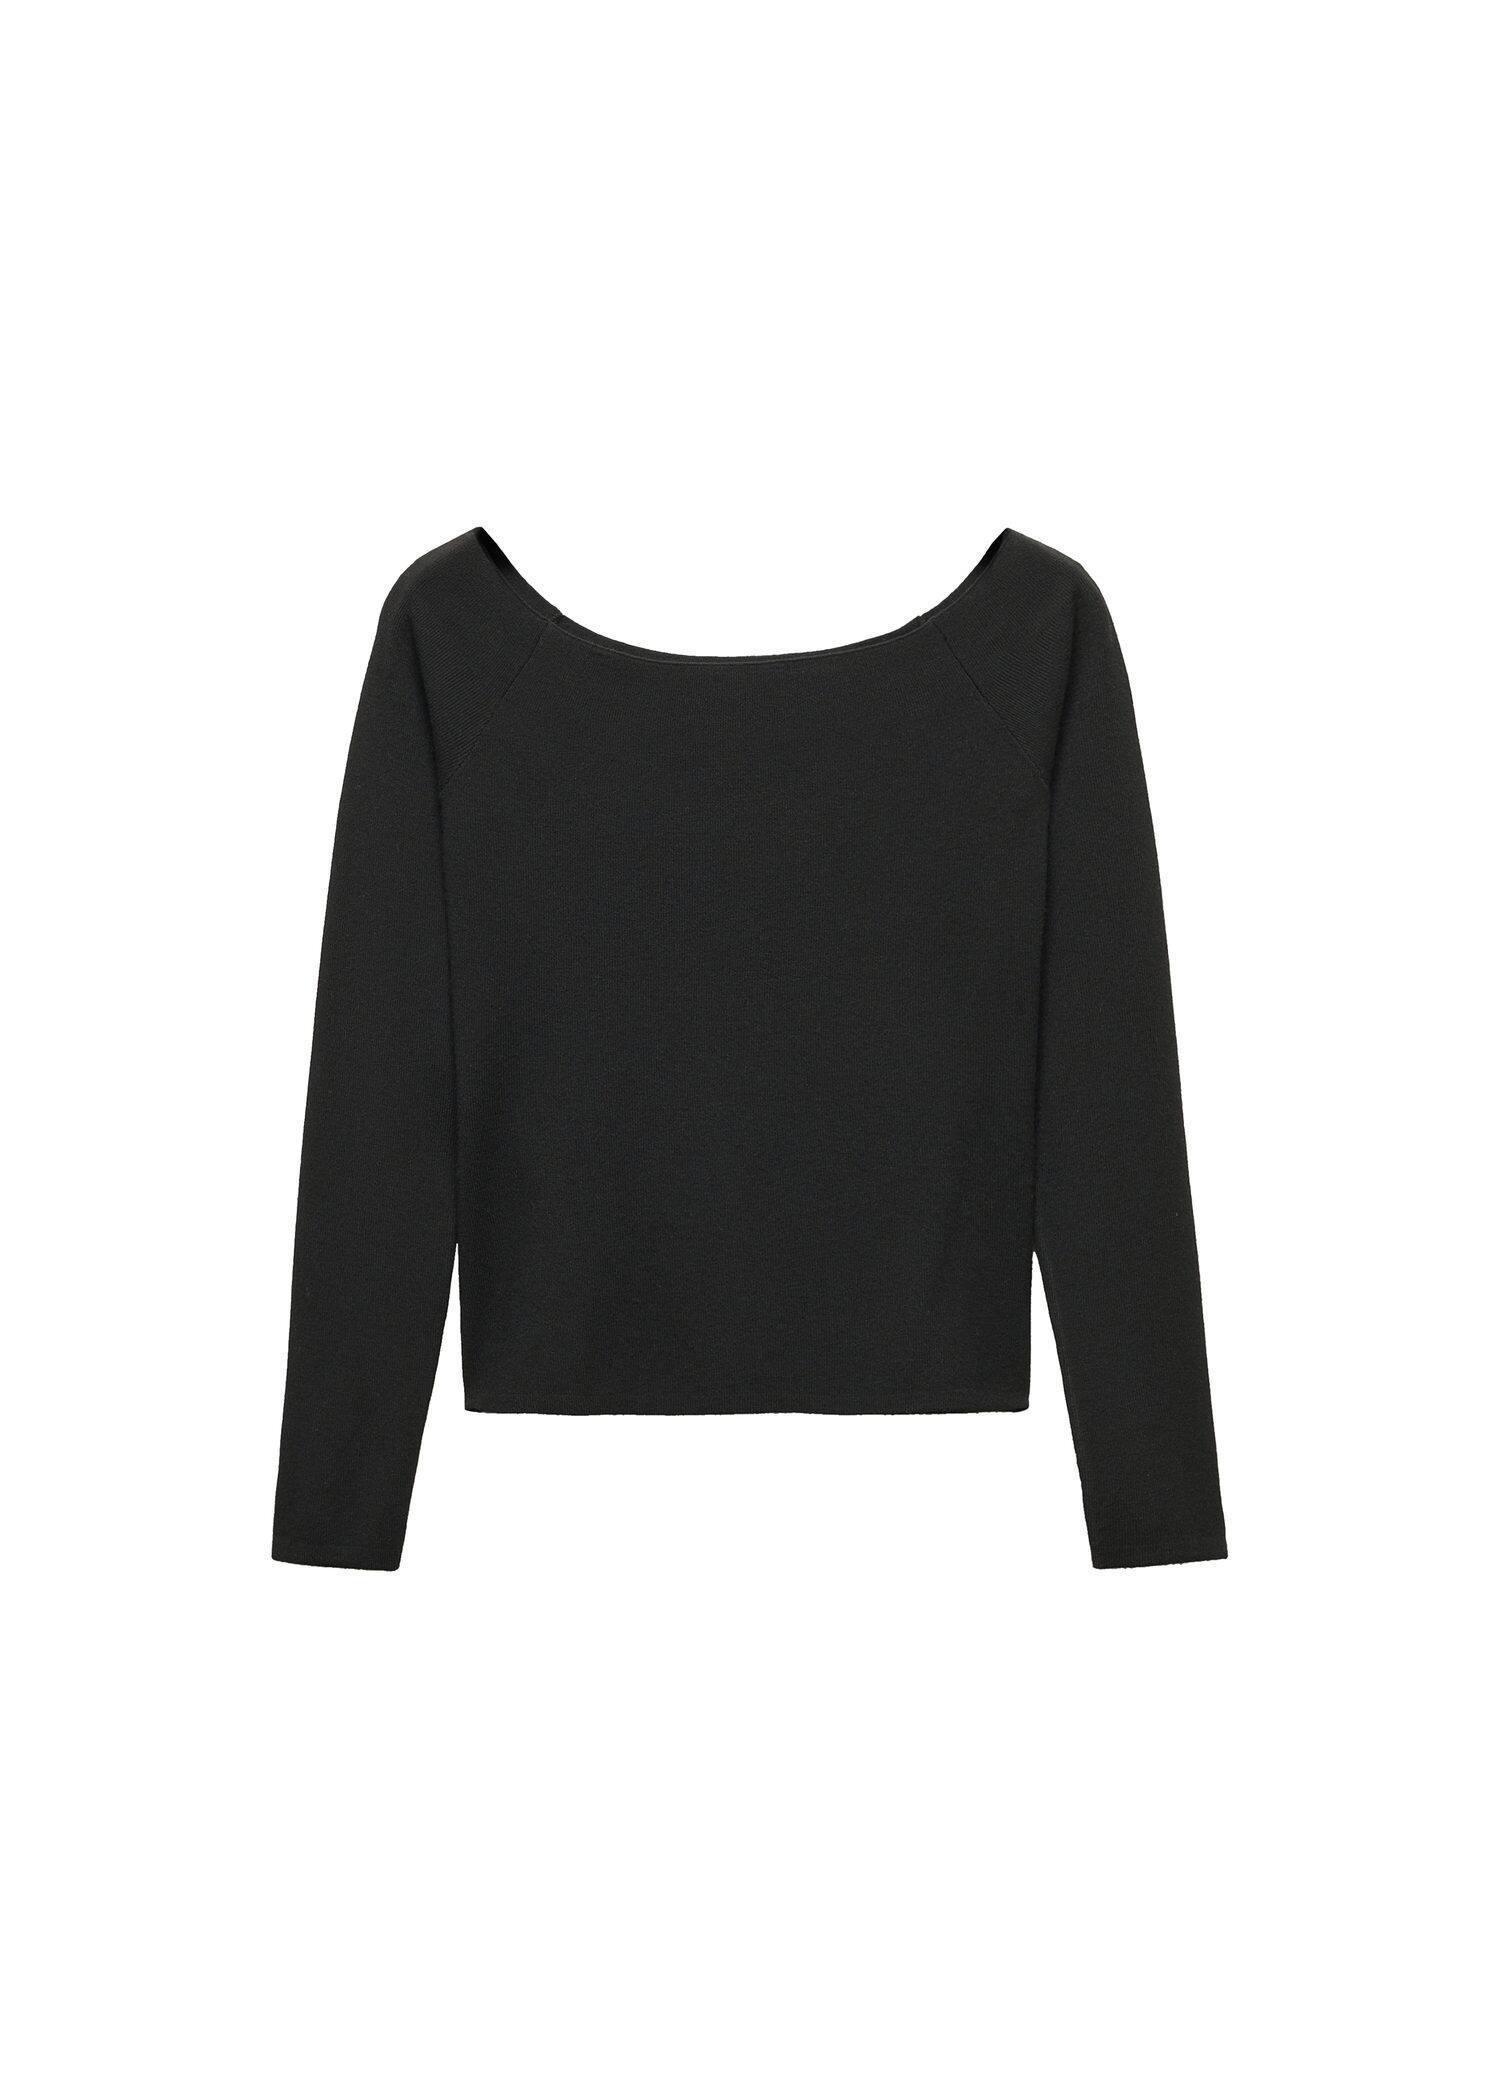 Mango - Black Off-The-Shoulder Knitted Sweater